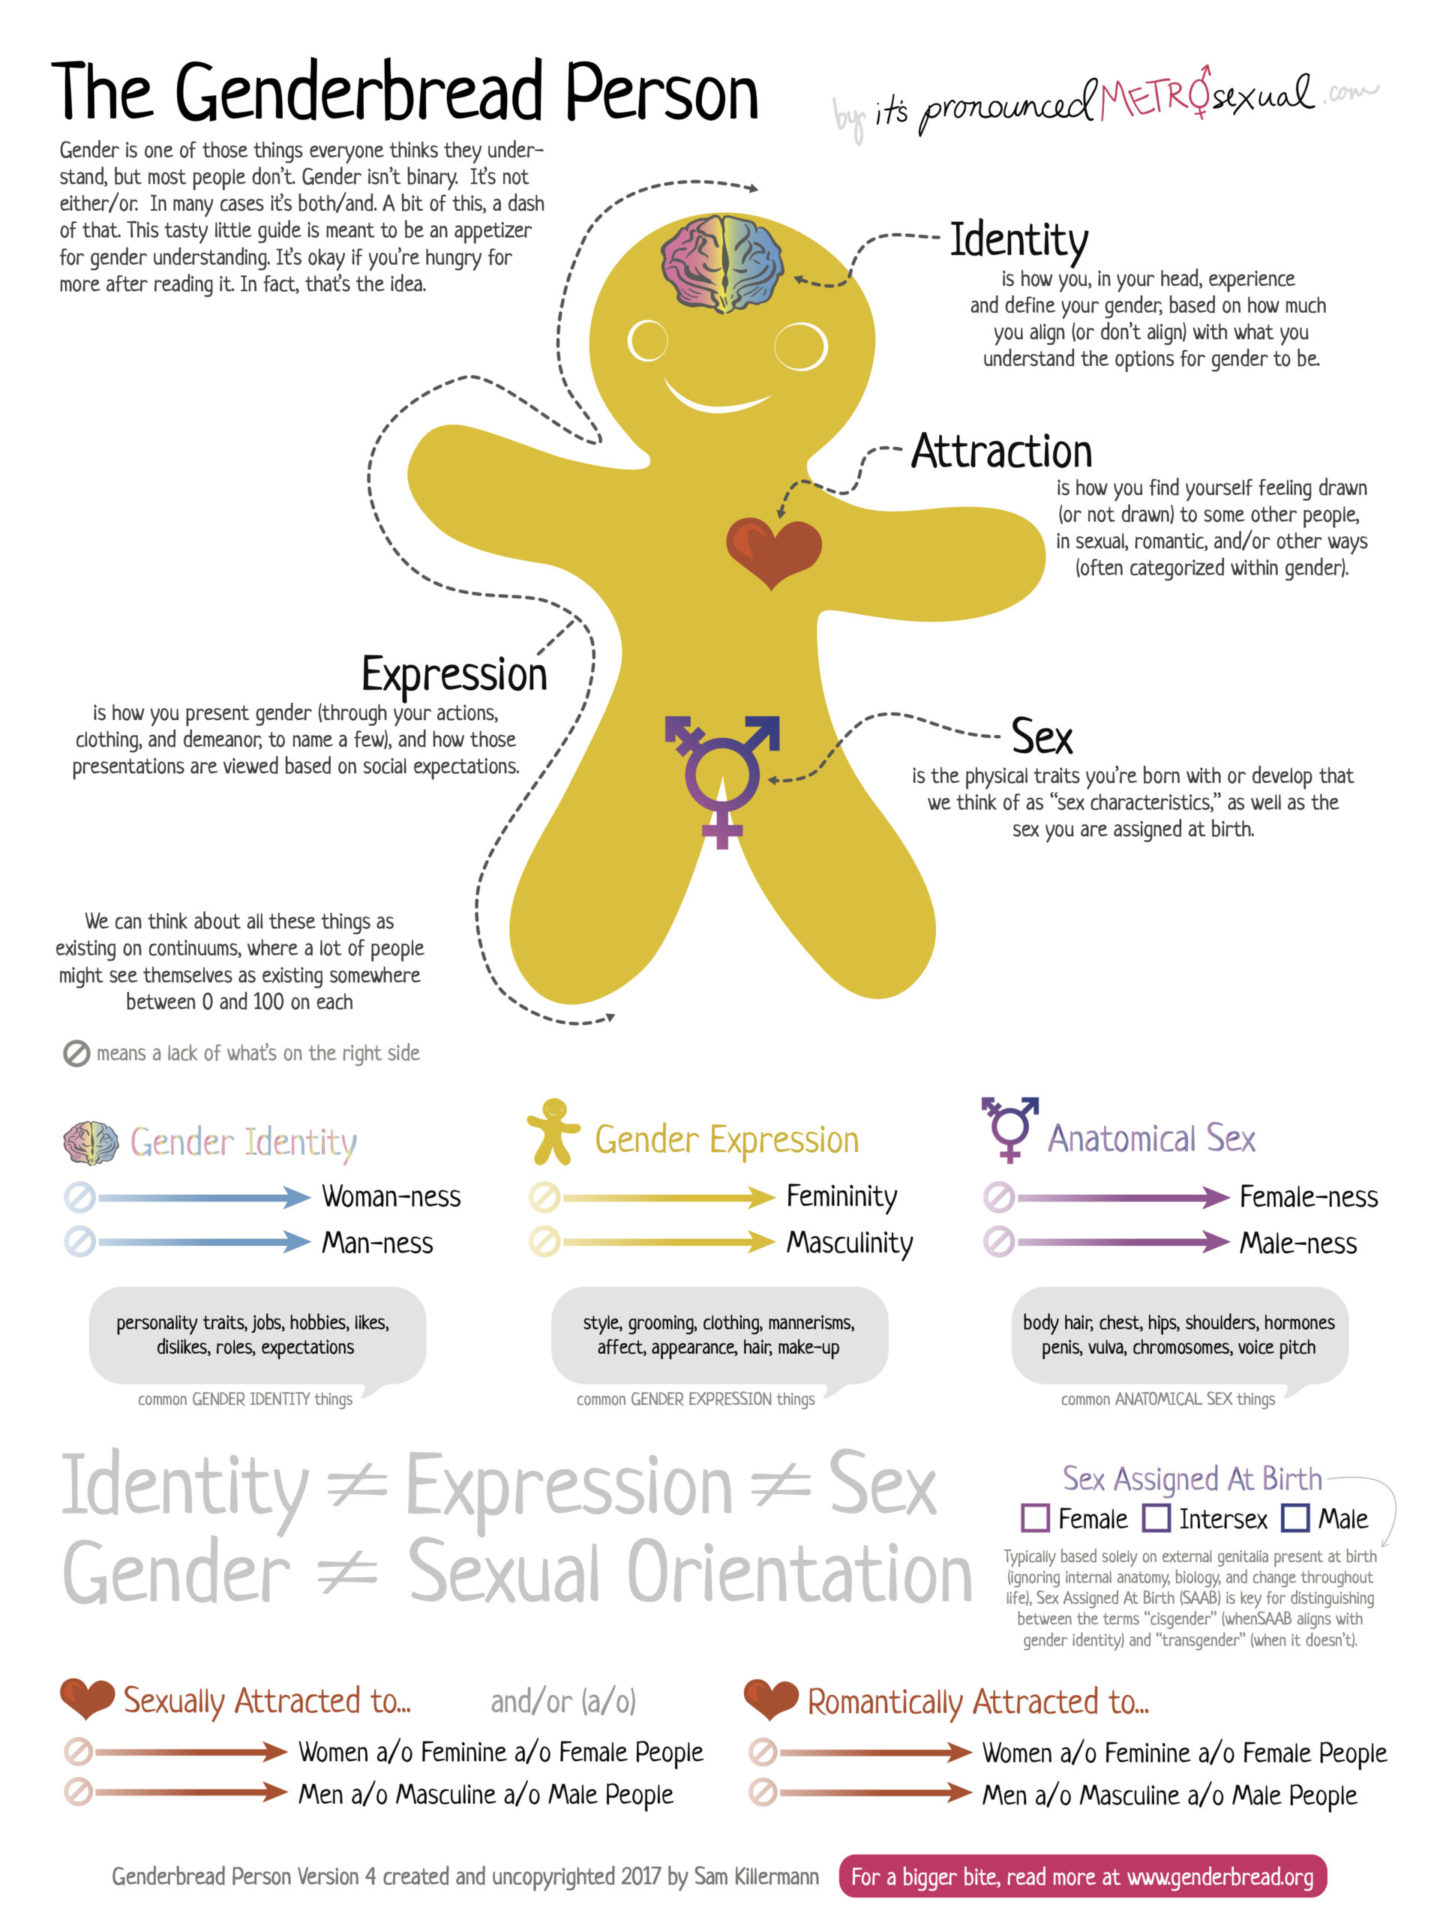 A graphic of language to describe various LGBTQIA+ identities. These topics might come up for LGBTQIA+ students studying abroad. Curious to explore your LGBTQIA+ identity in a new context? Here are some LGBTQIA+ study abroad tips!